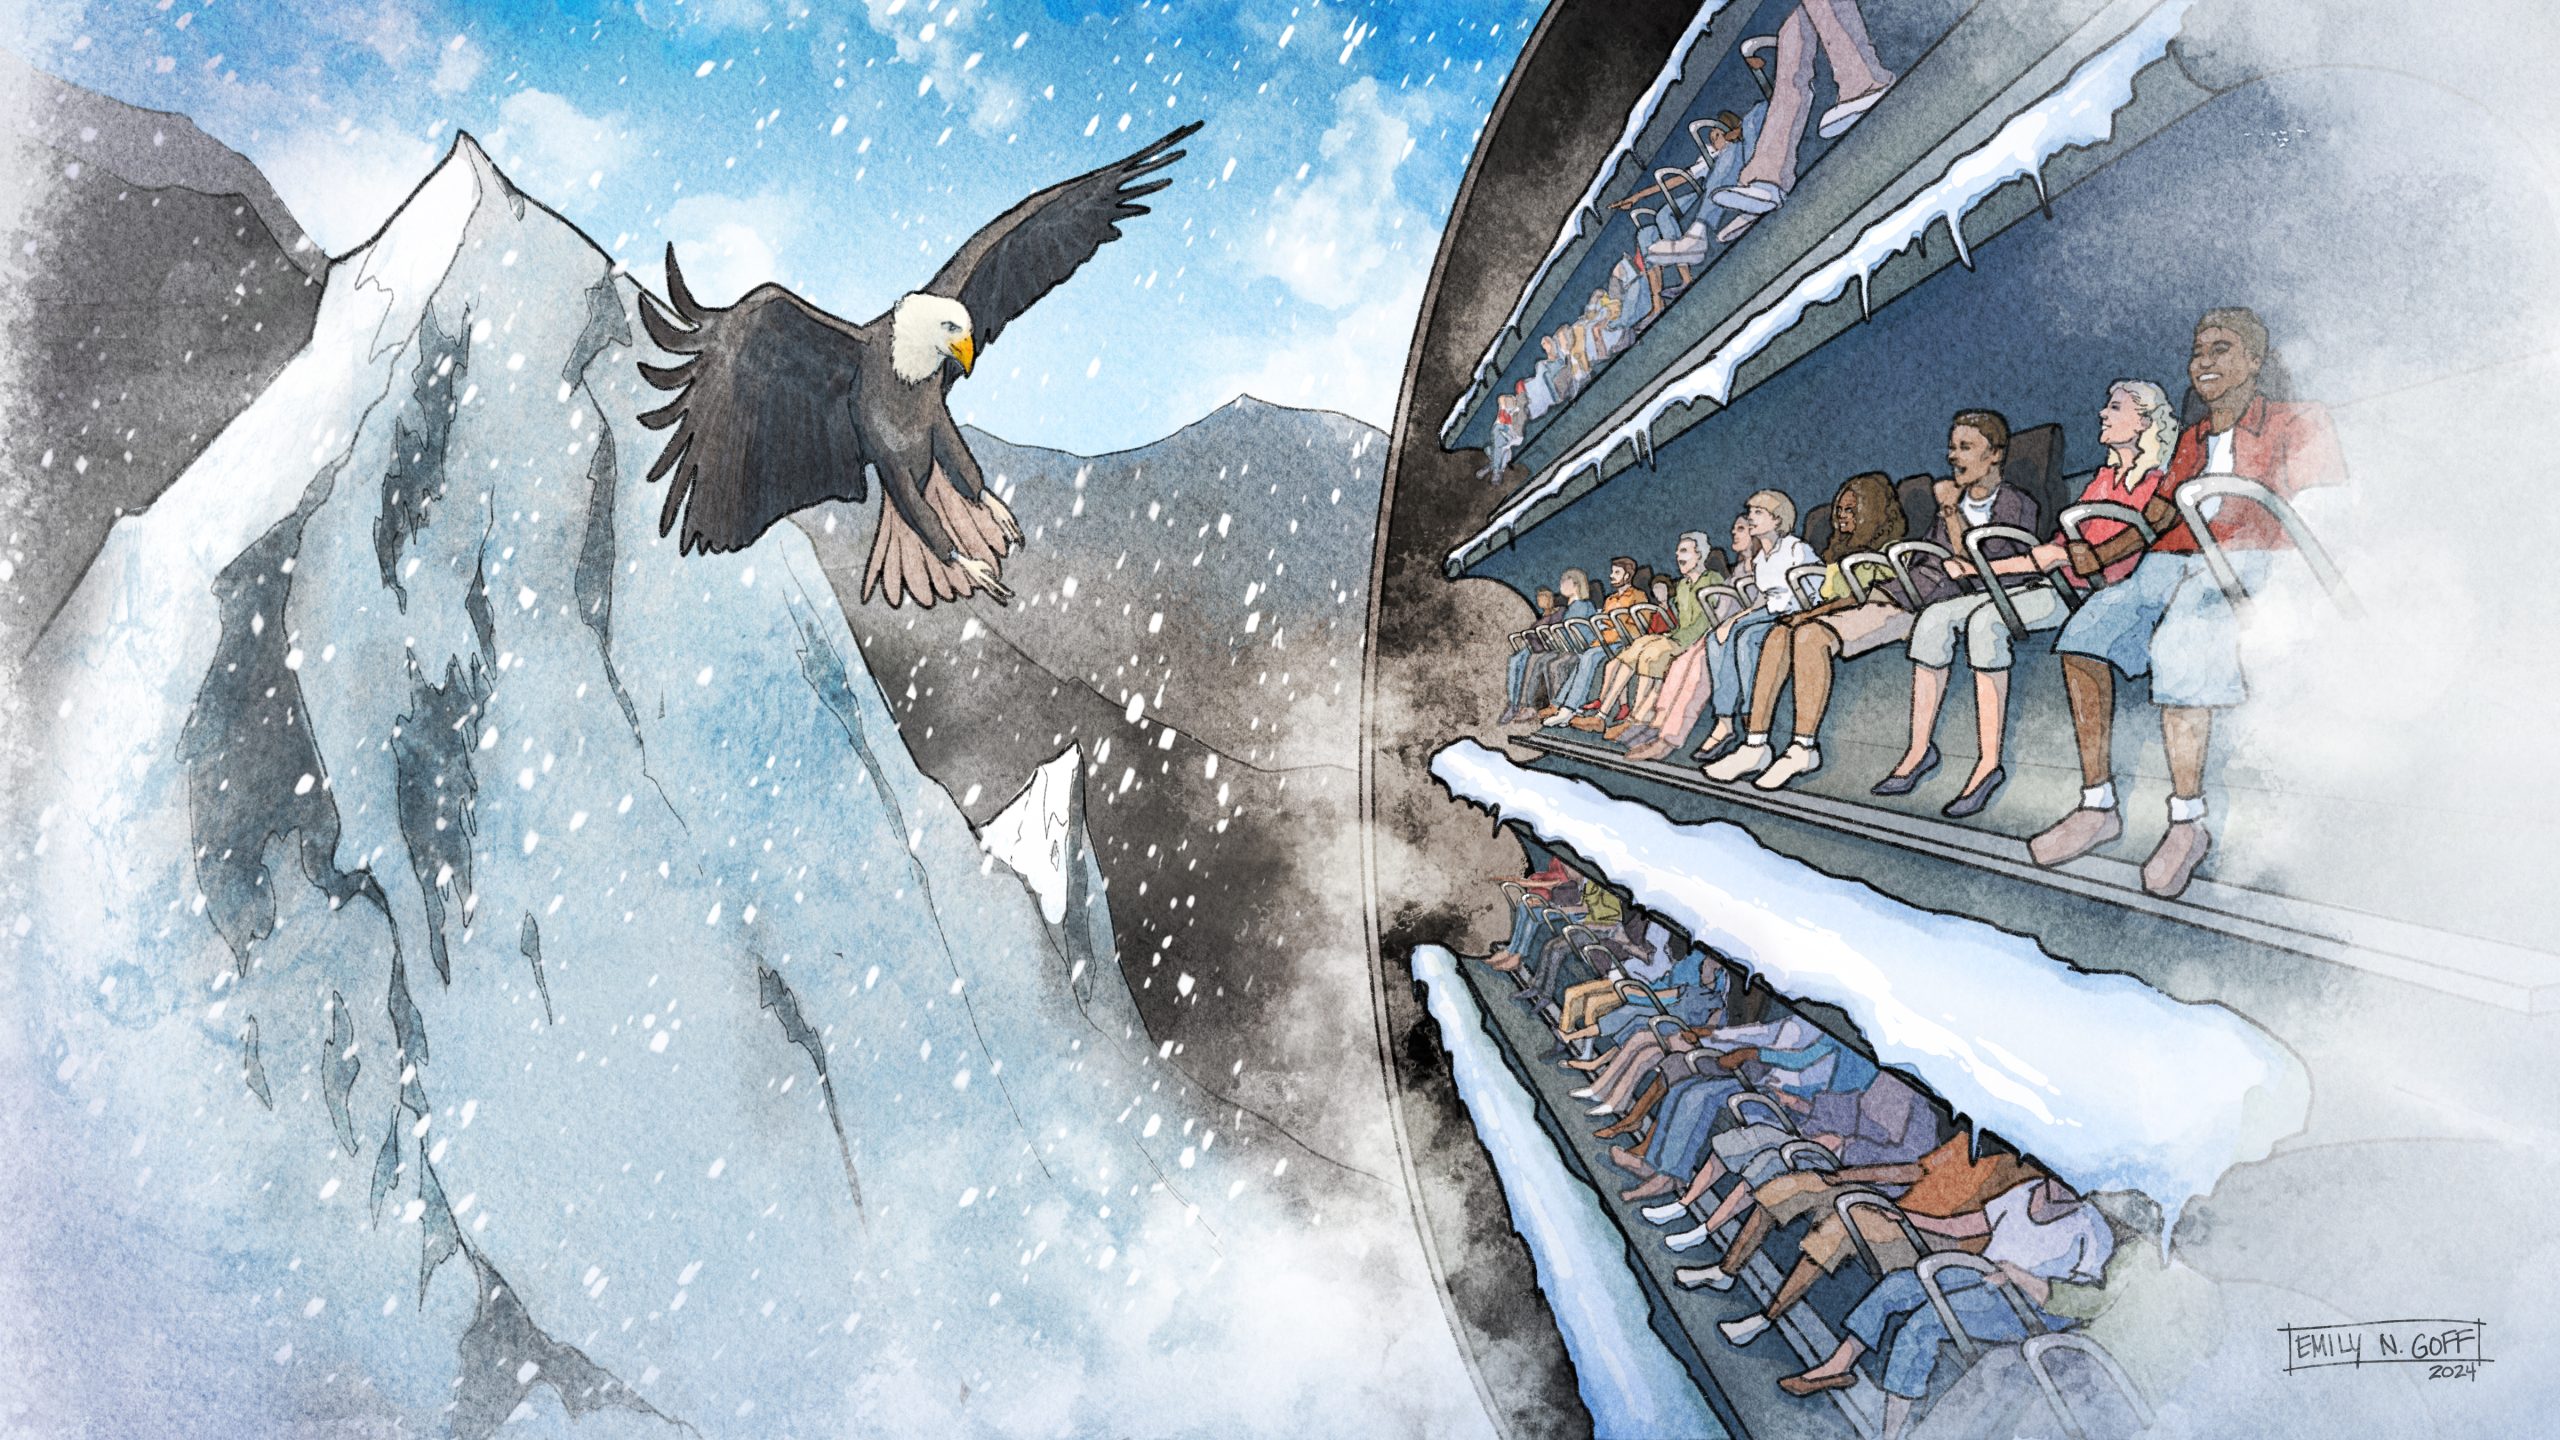 Glacier Beach Colorado Unveils Soarin’ Over the Rockies: A Thrilling Journey Through Time and Nature